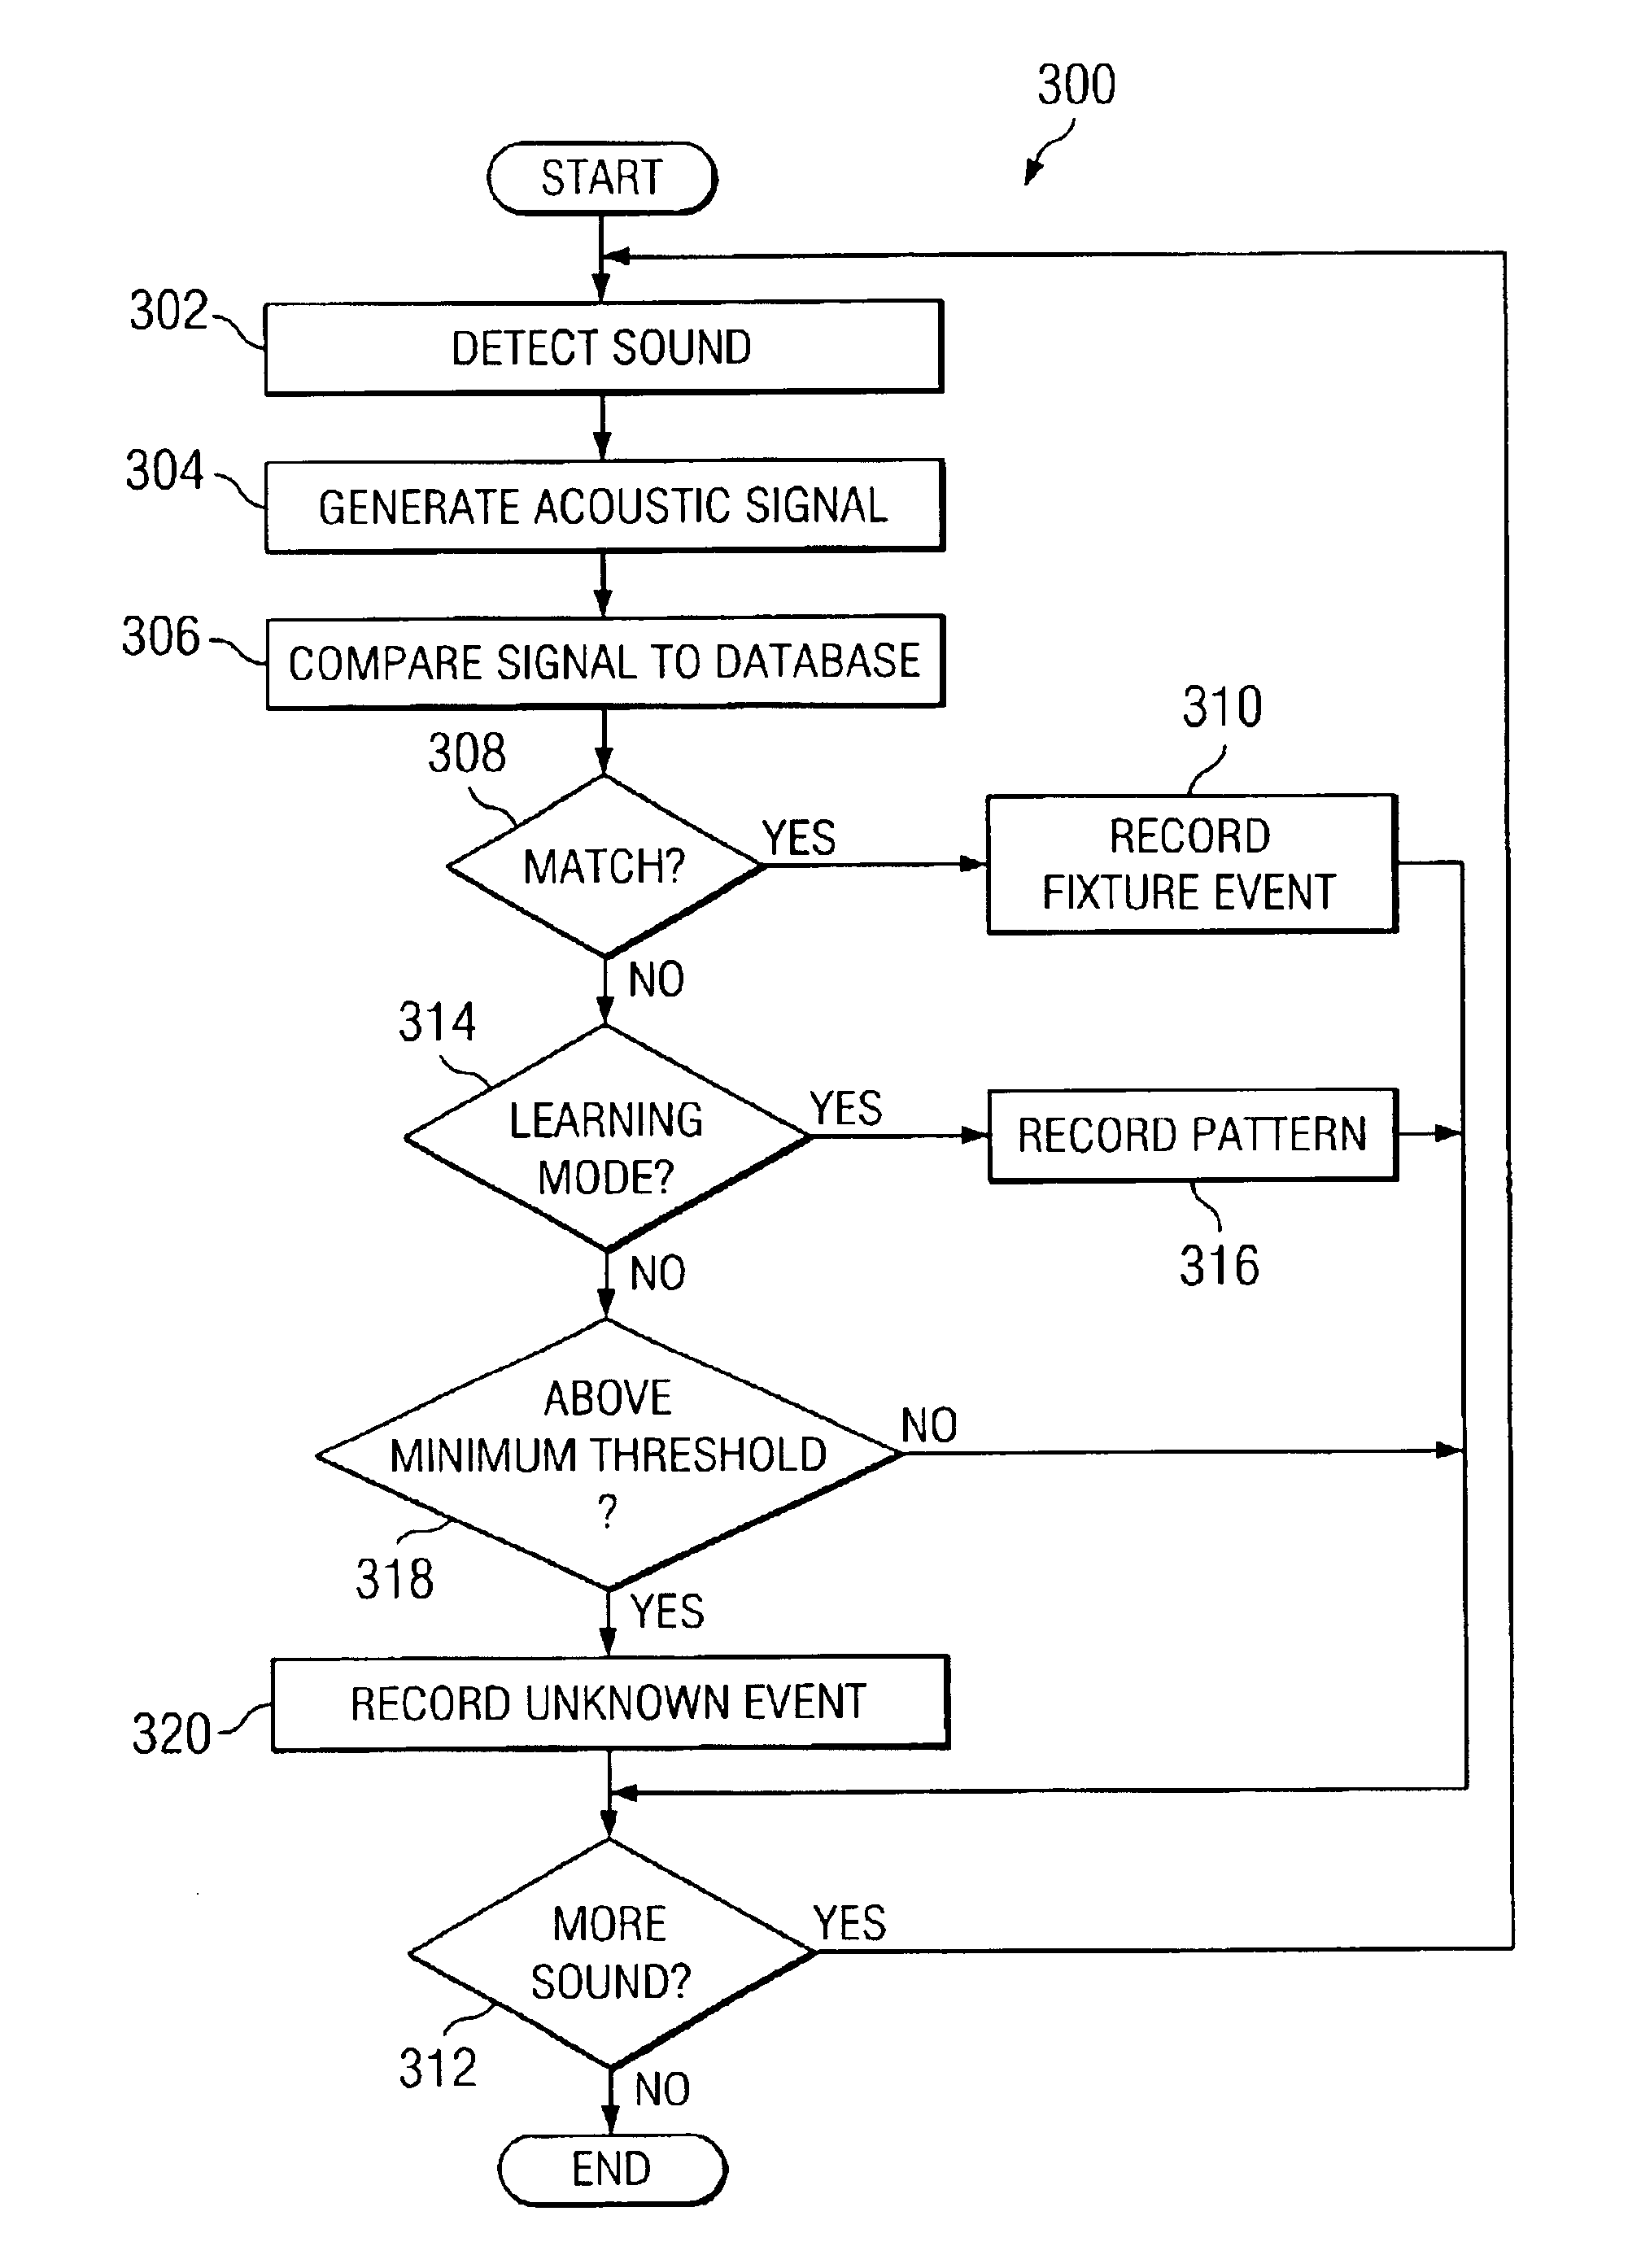 Plumbing supply monitoring, modeling and sizing system and method